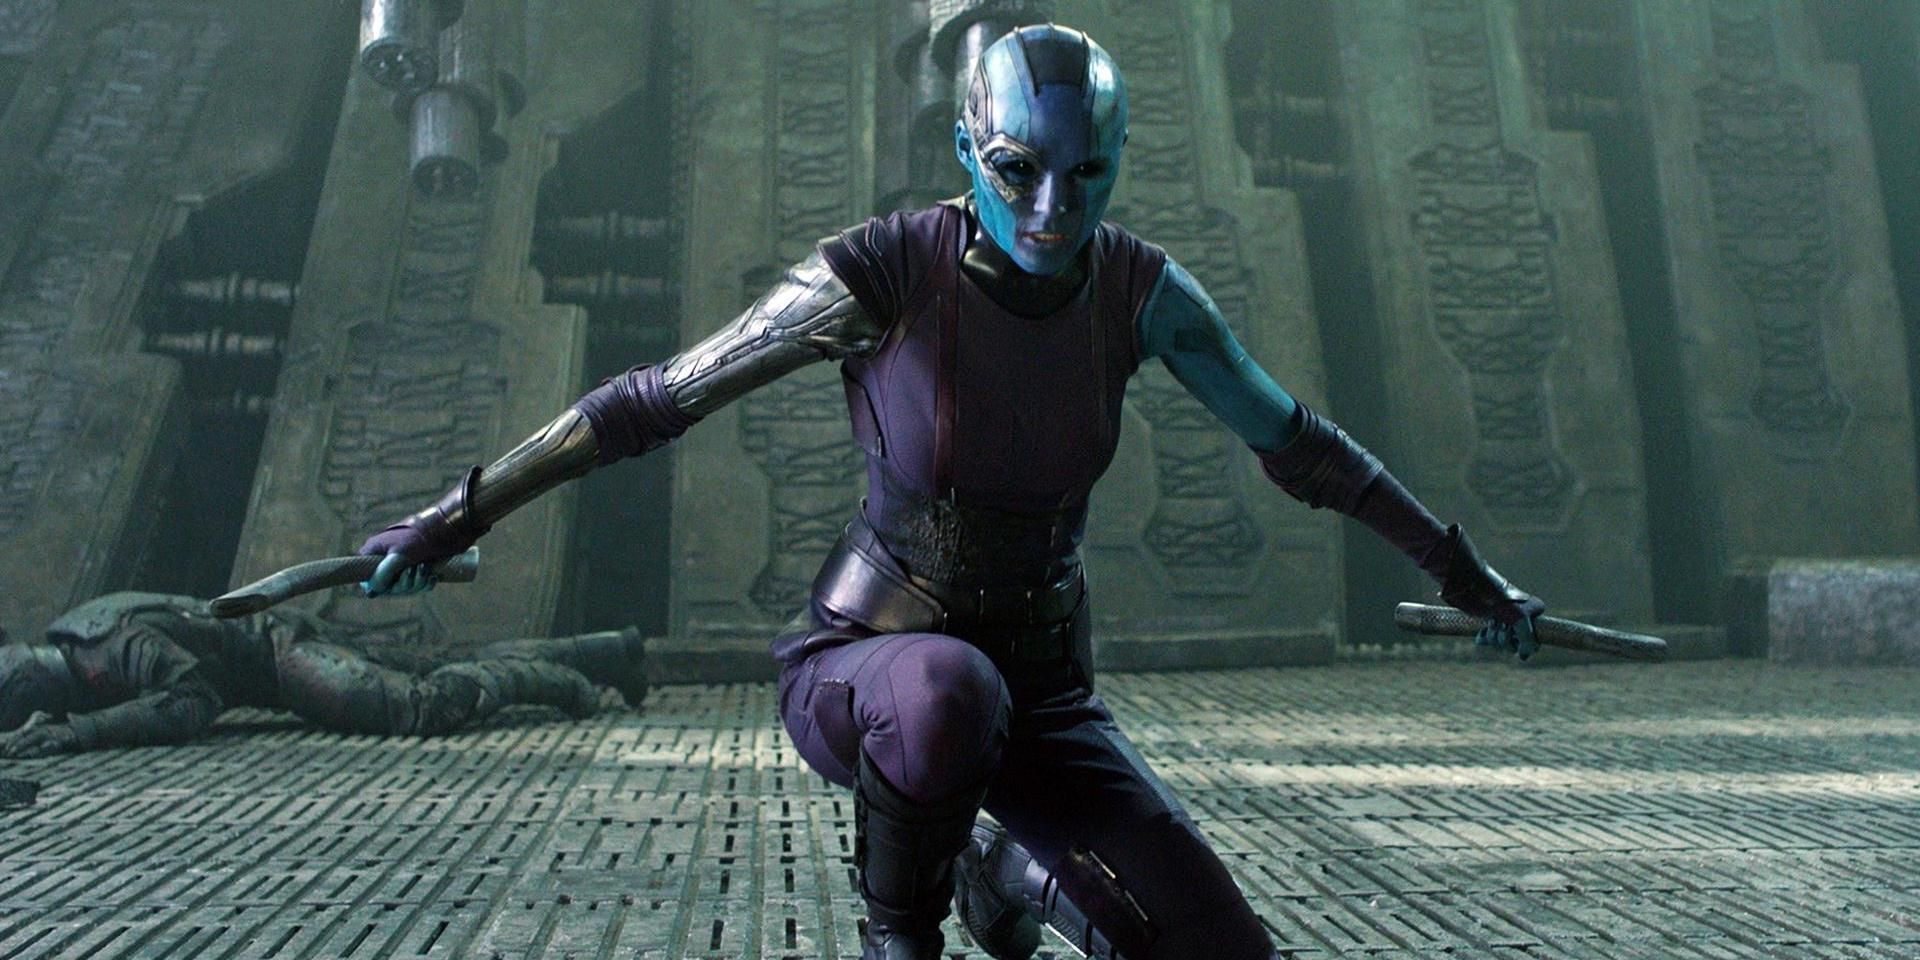 Nebula kneels, brandishing her weapons, in Guardians of the Galaxy